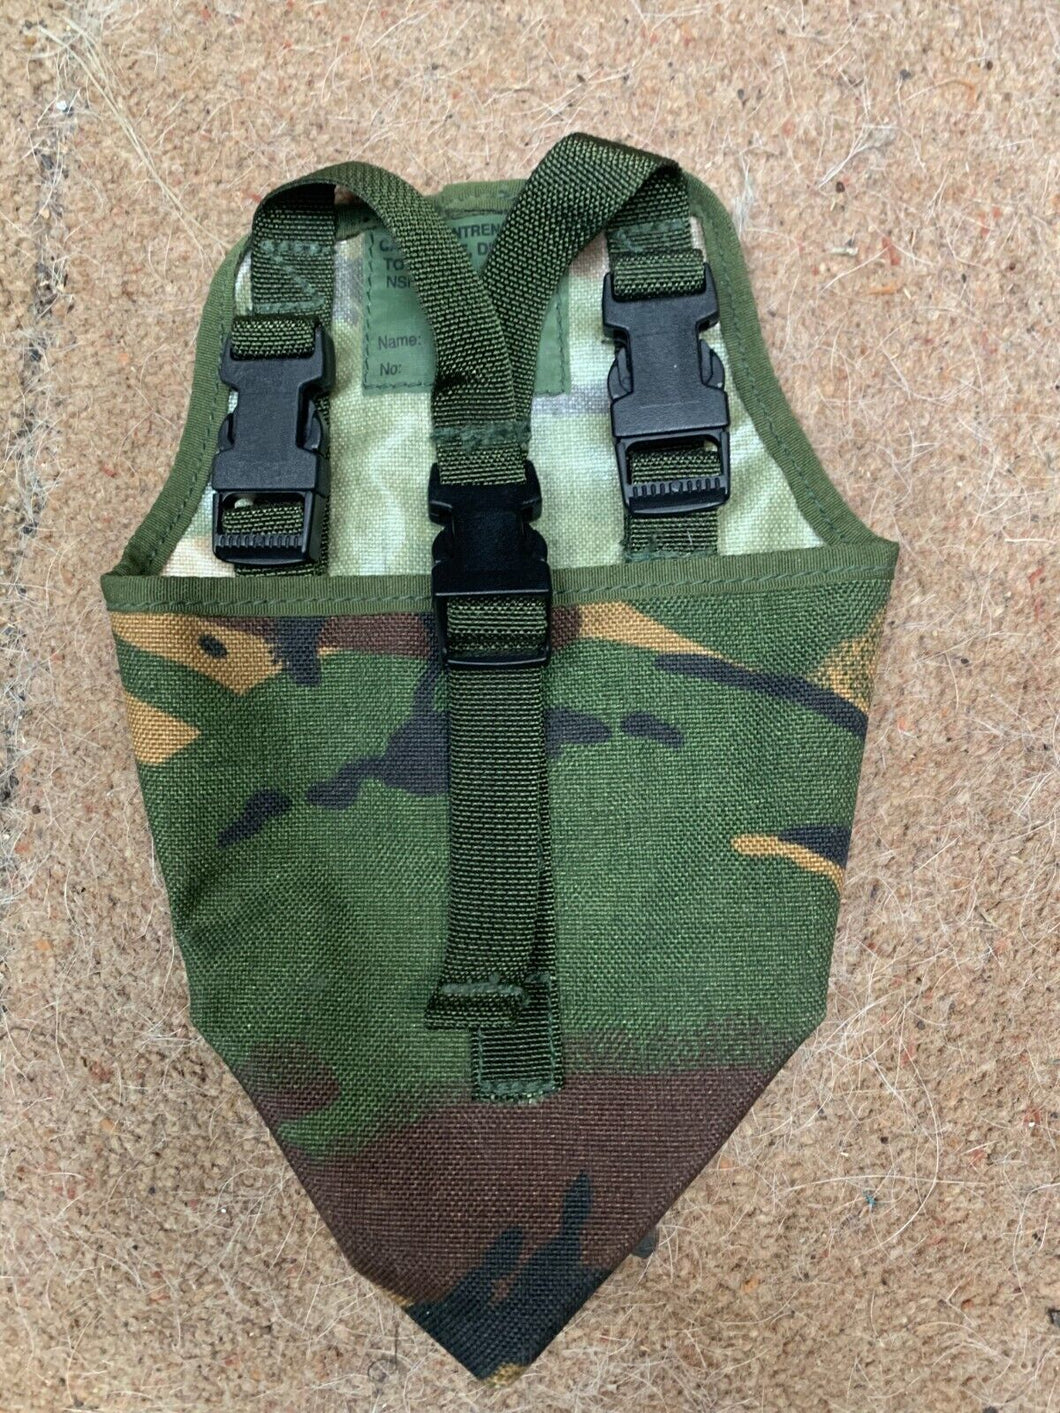 British Army DPM Carrier Entrenching Tool Case